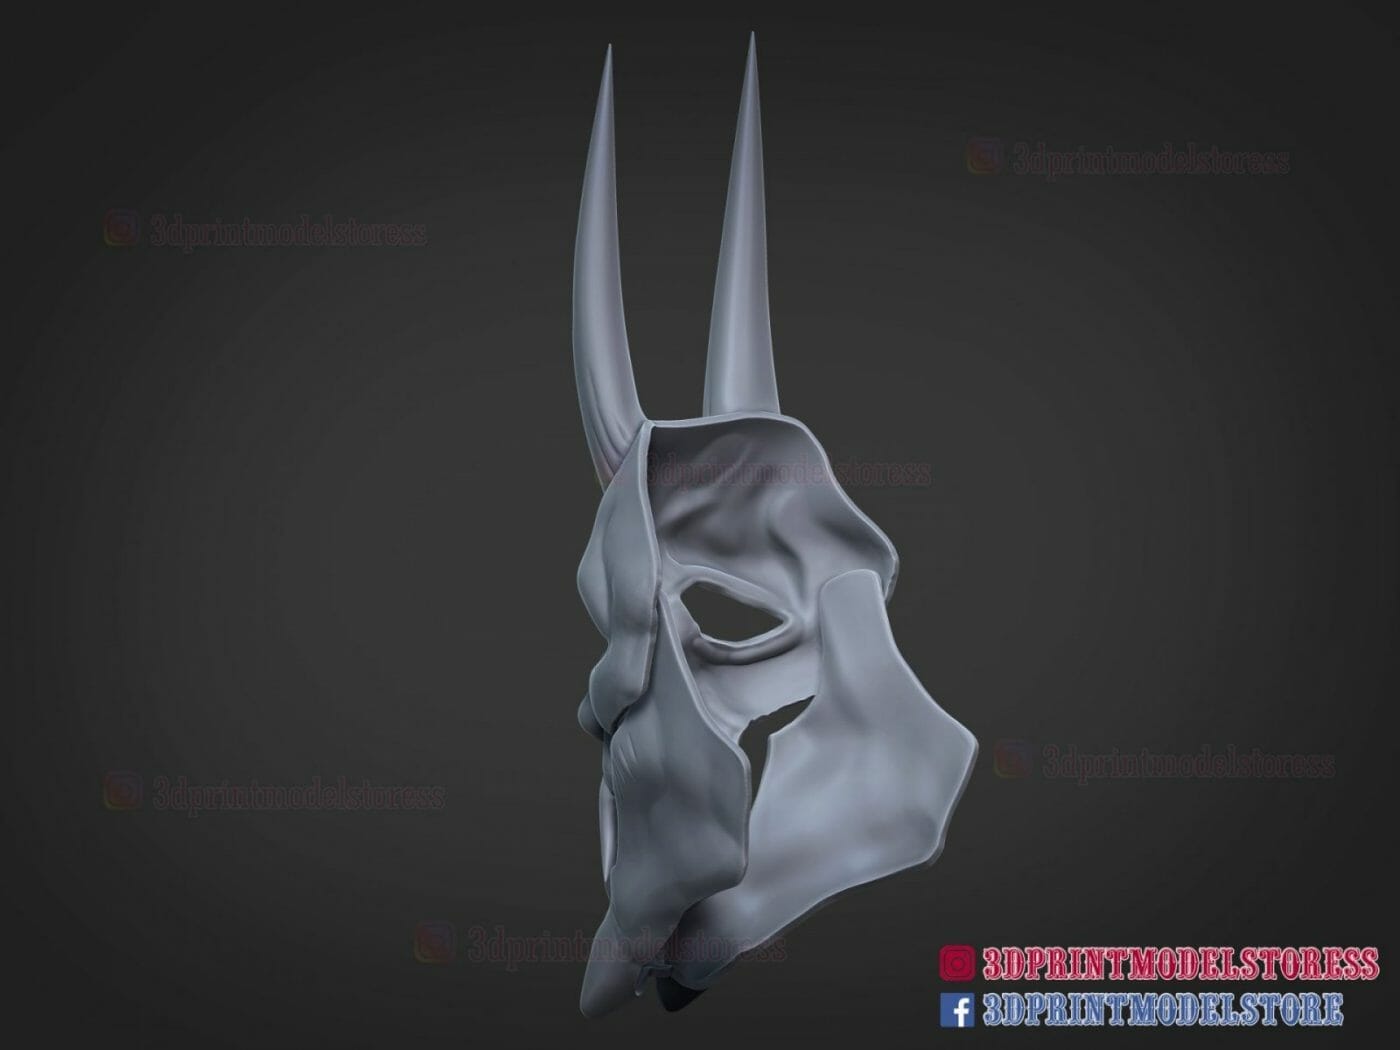 Neon White Red Mask for Cosplay Halloween 3D Print Model